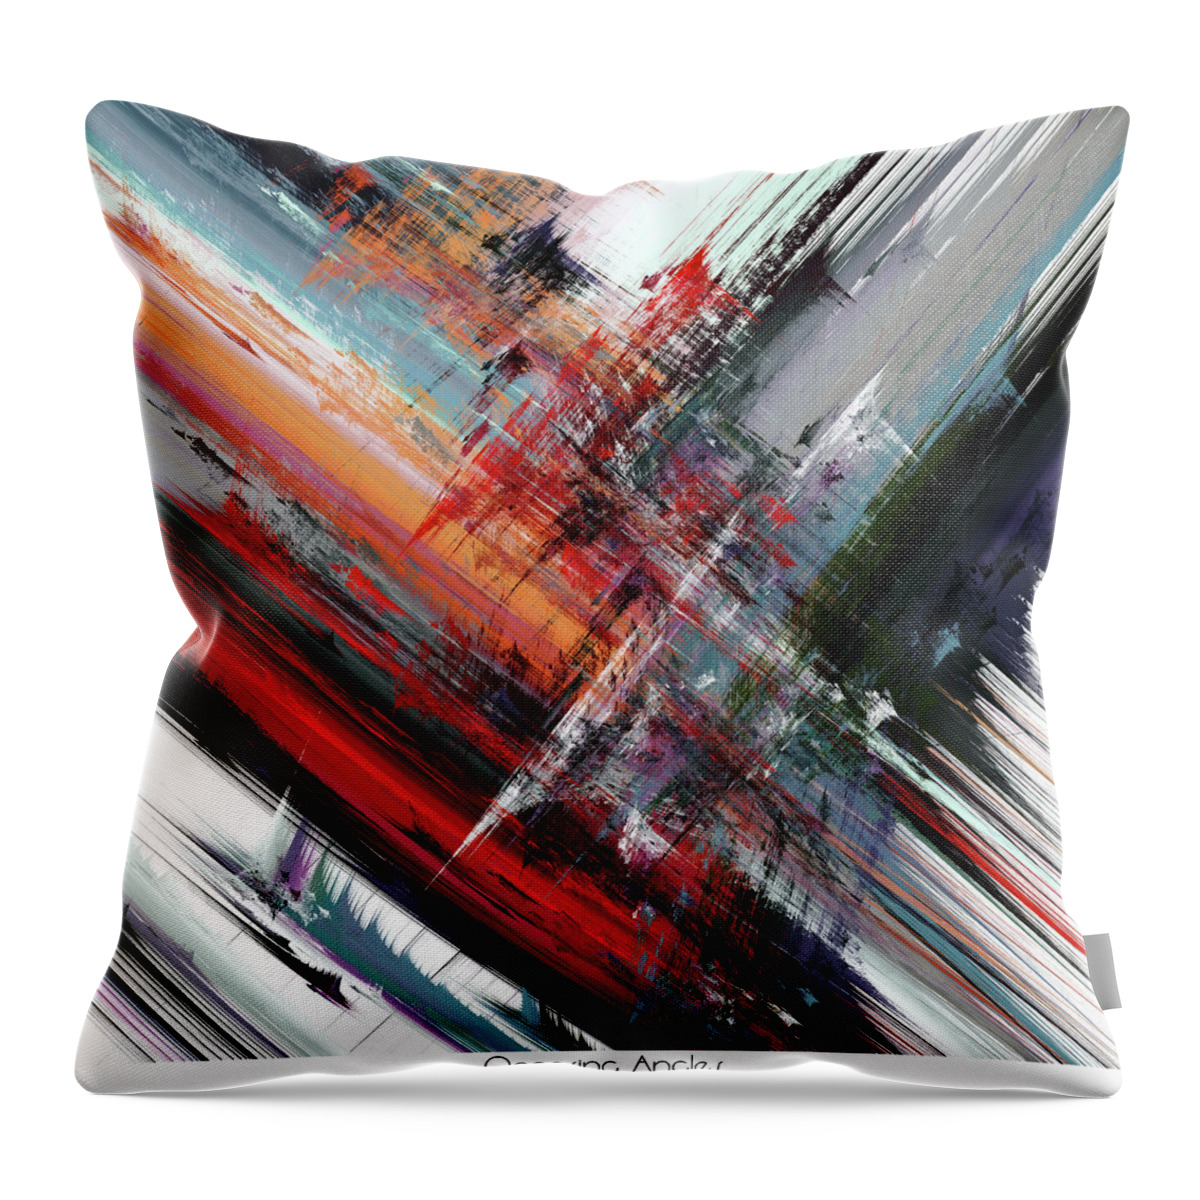 Abstract Throw Pillow featuring the digital art Opposing Angles 2 by Hal Tenny